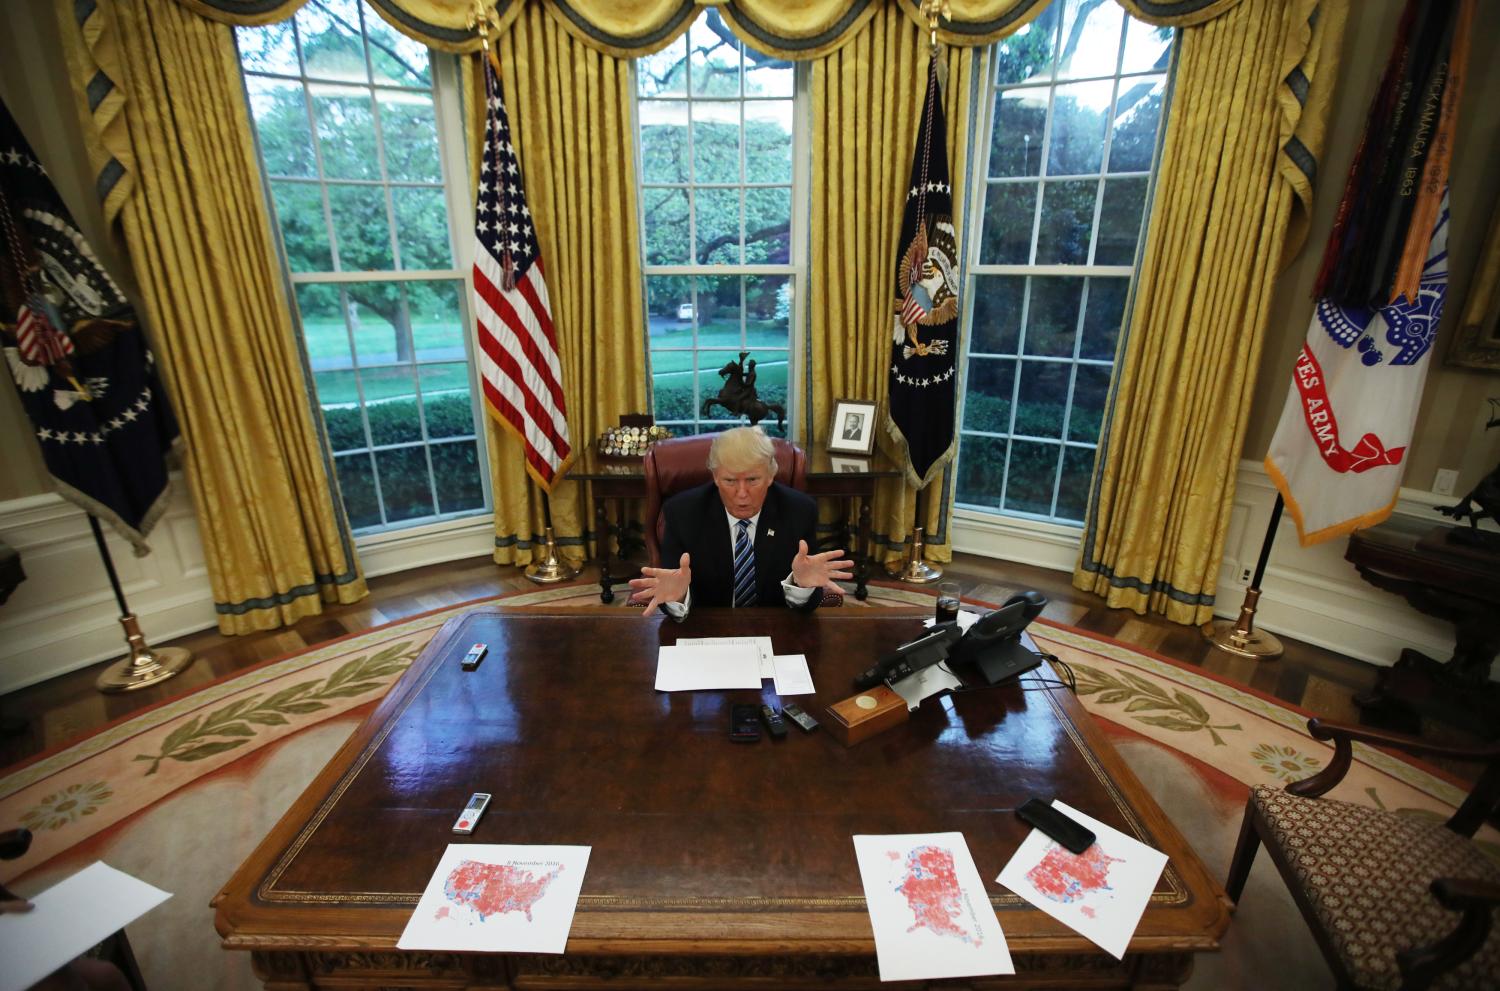 U.S. President Donald Trump speaks during an interview with Reuters in the Oval Office of the White House in Washington, U.S., April 27, 2017. REUTERS/Carlos Barria   TPX IMAGES OF THE DAY - HP1ED4S02VJ7Y